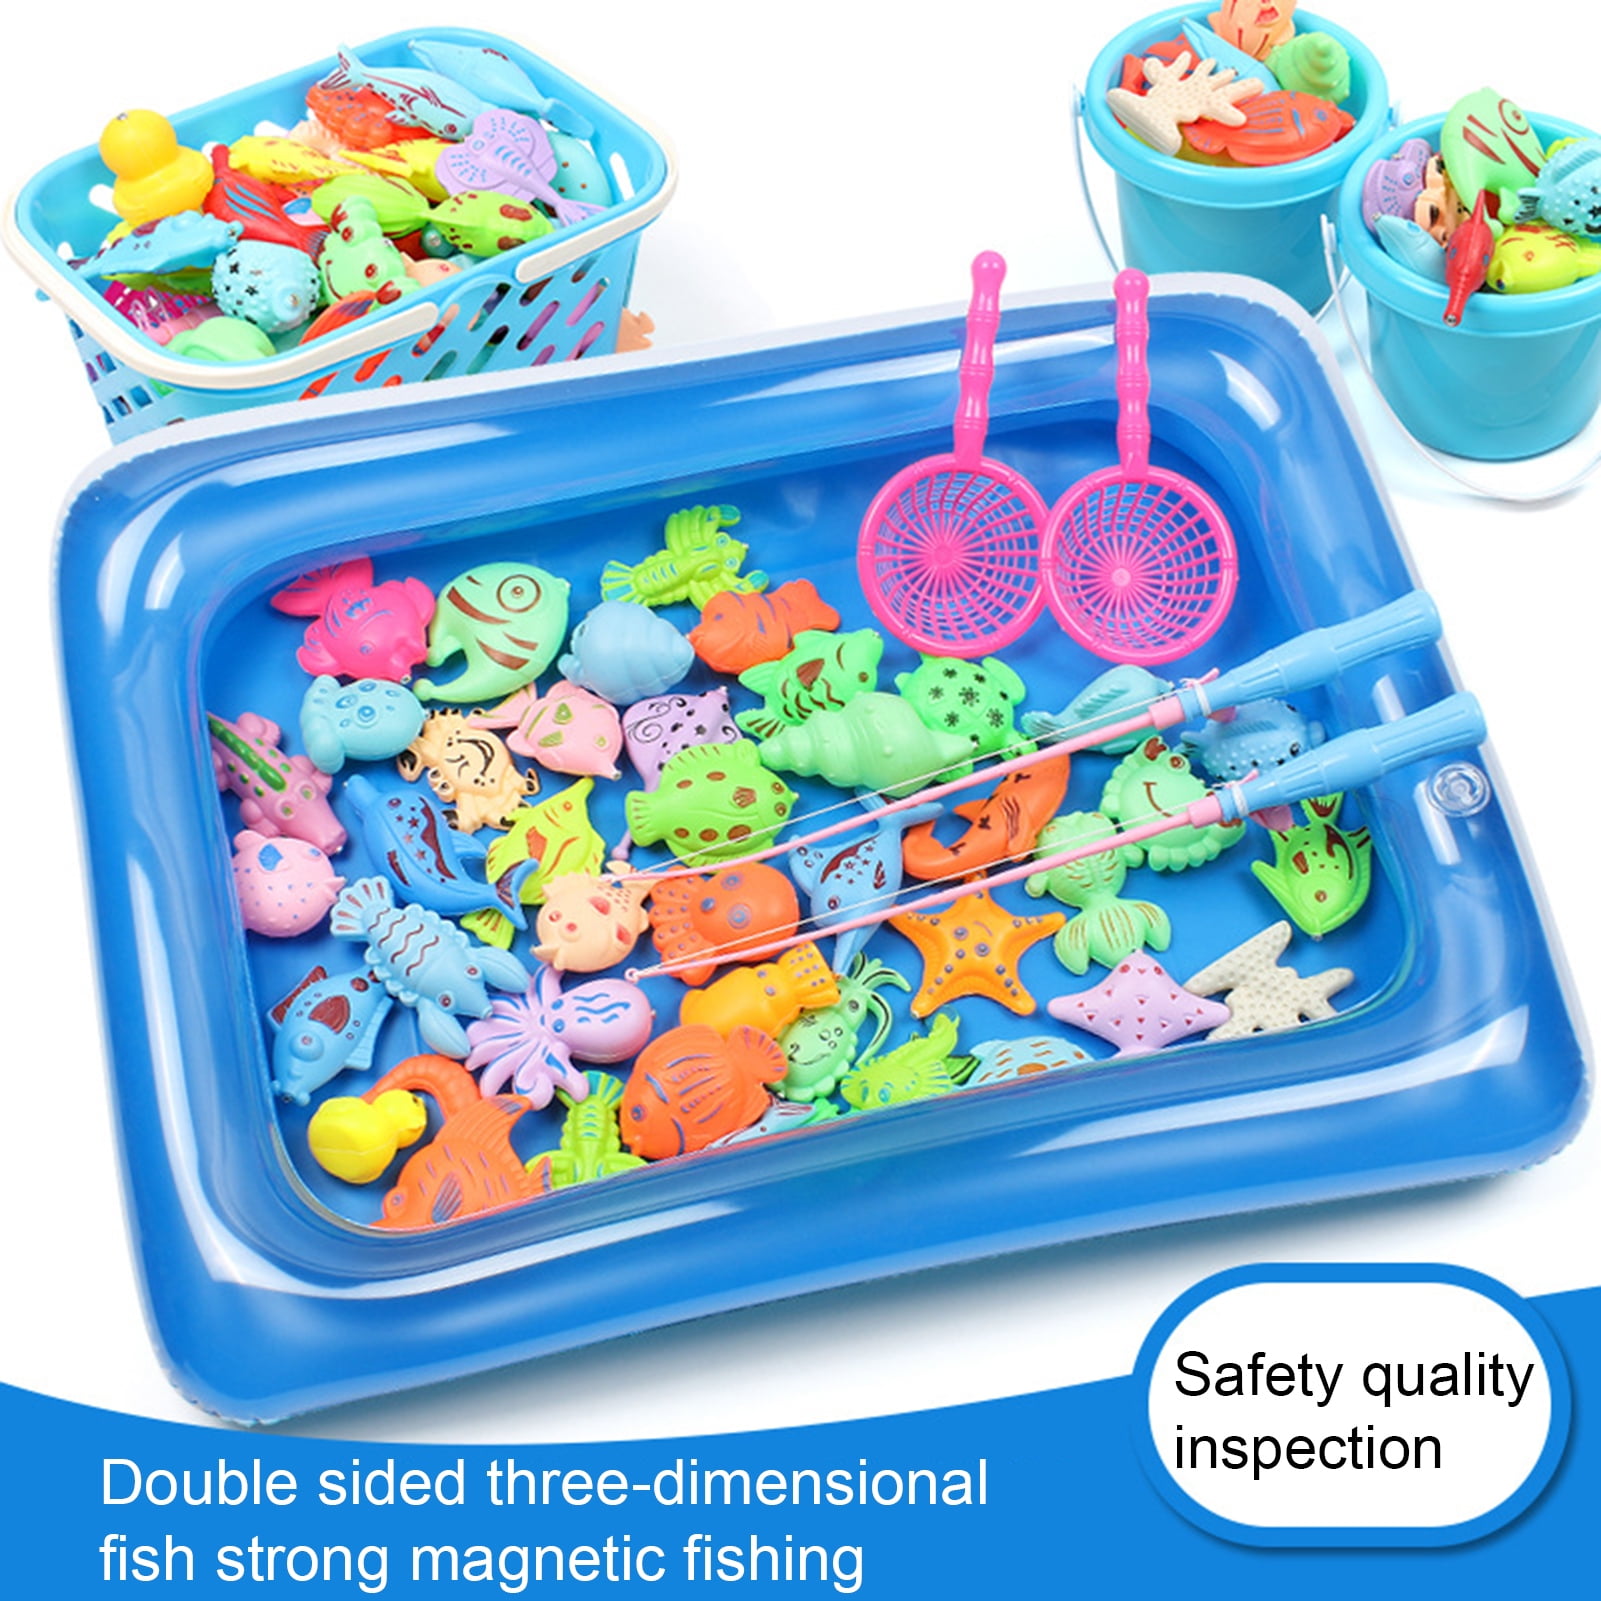 Cheer US Kids Pool Fishing Toys Games - Summer Magnetic Floating Toy Magnet  Pole Rod Fish Net Water Table Bathtub Bath Game - Learning Education For